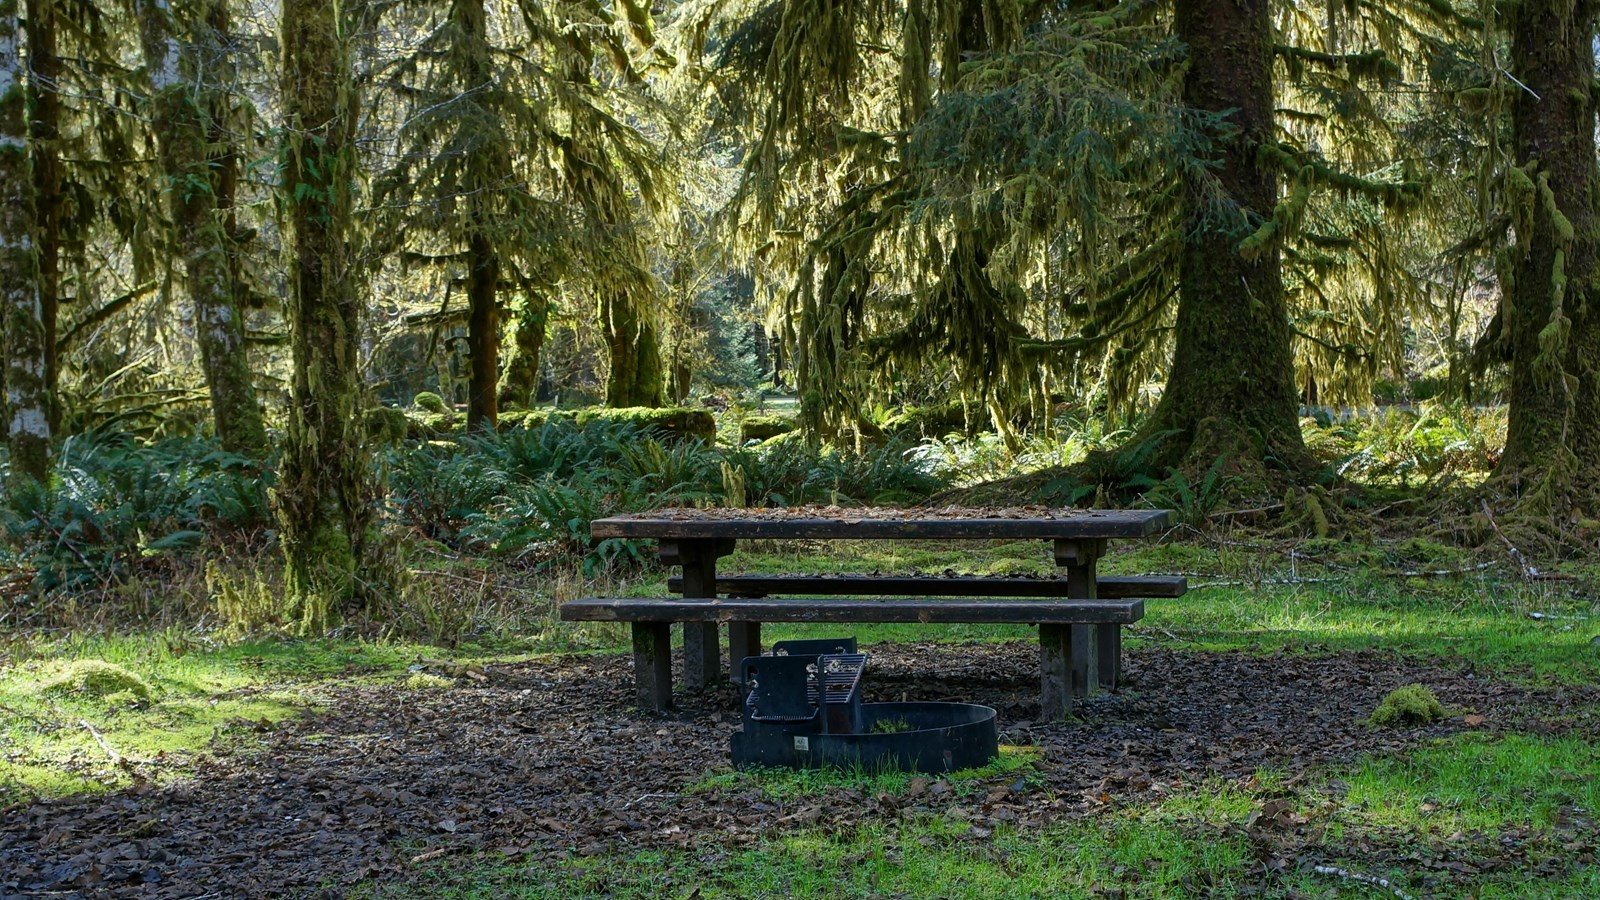 A picnic table in a mossy green rain forest setting